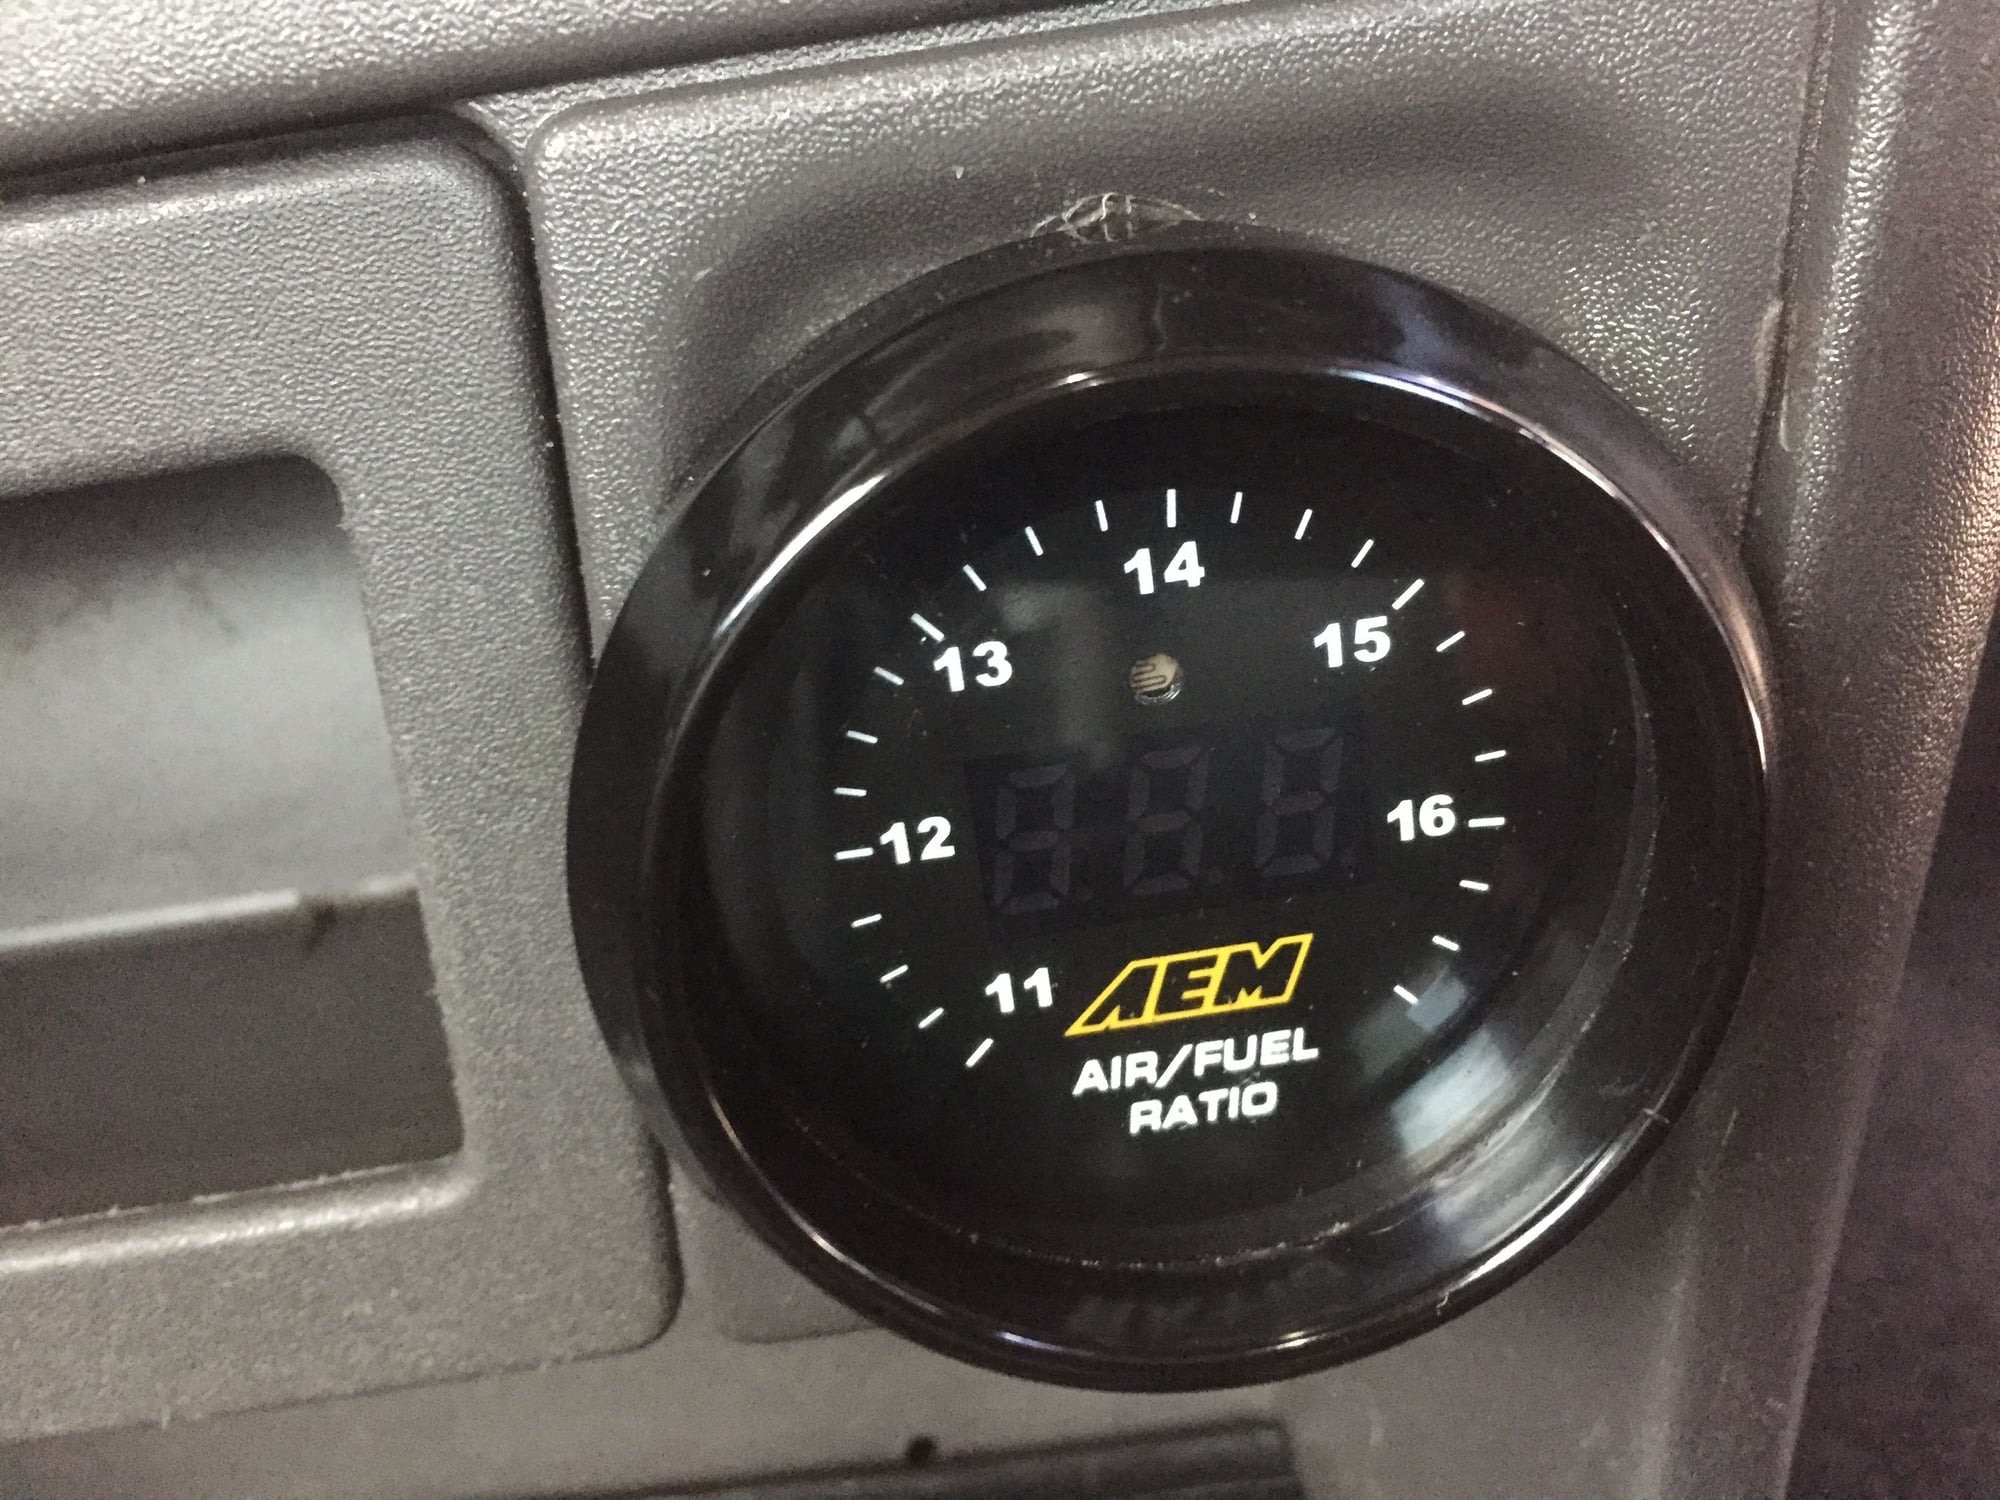 Accessories - AEM Wideband - Used - All Years Any Make All Models - Hernandez, NM 87537, United States